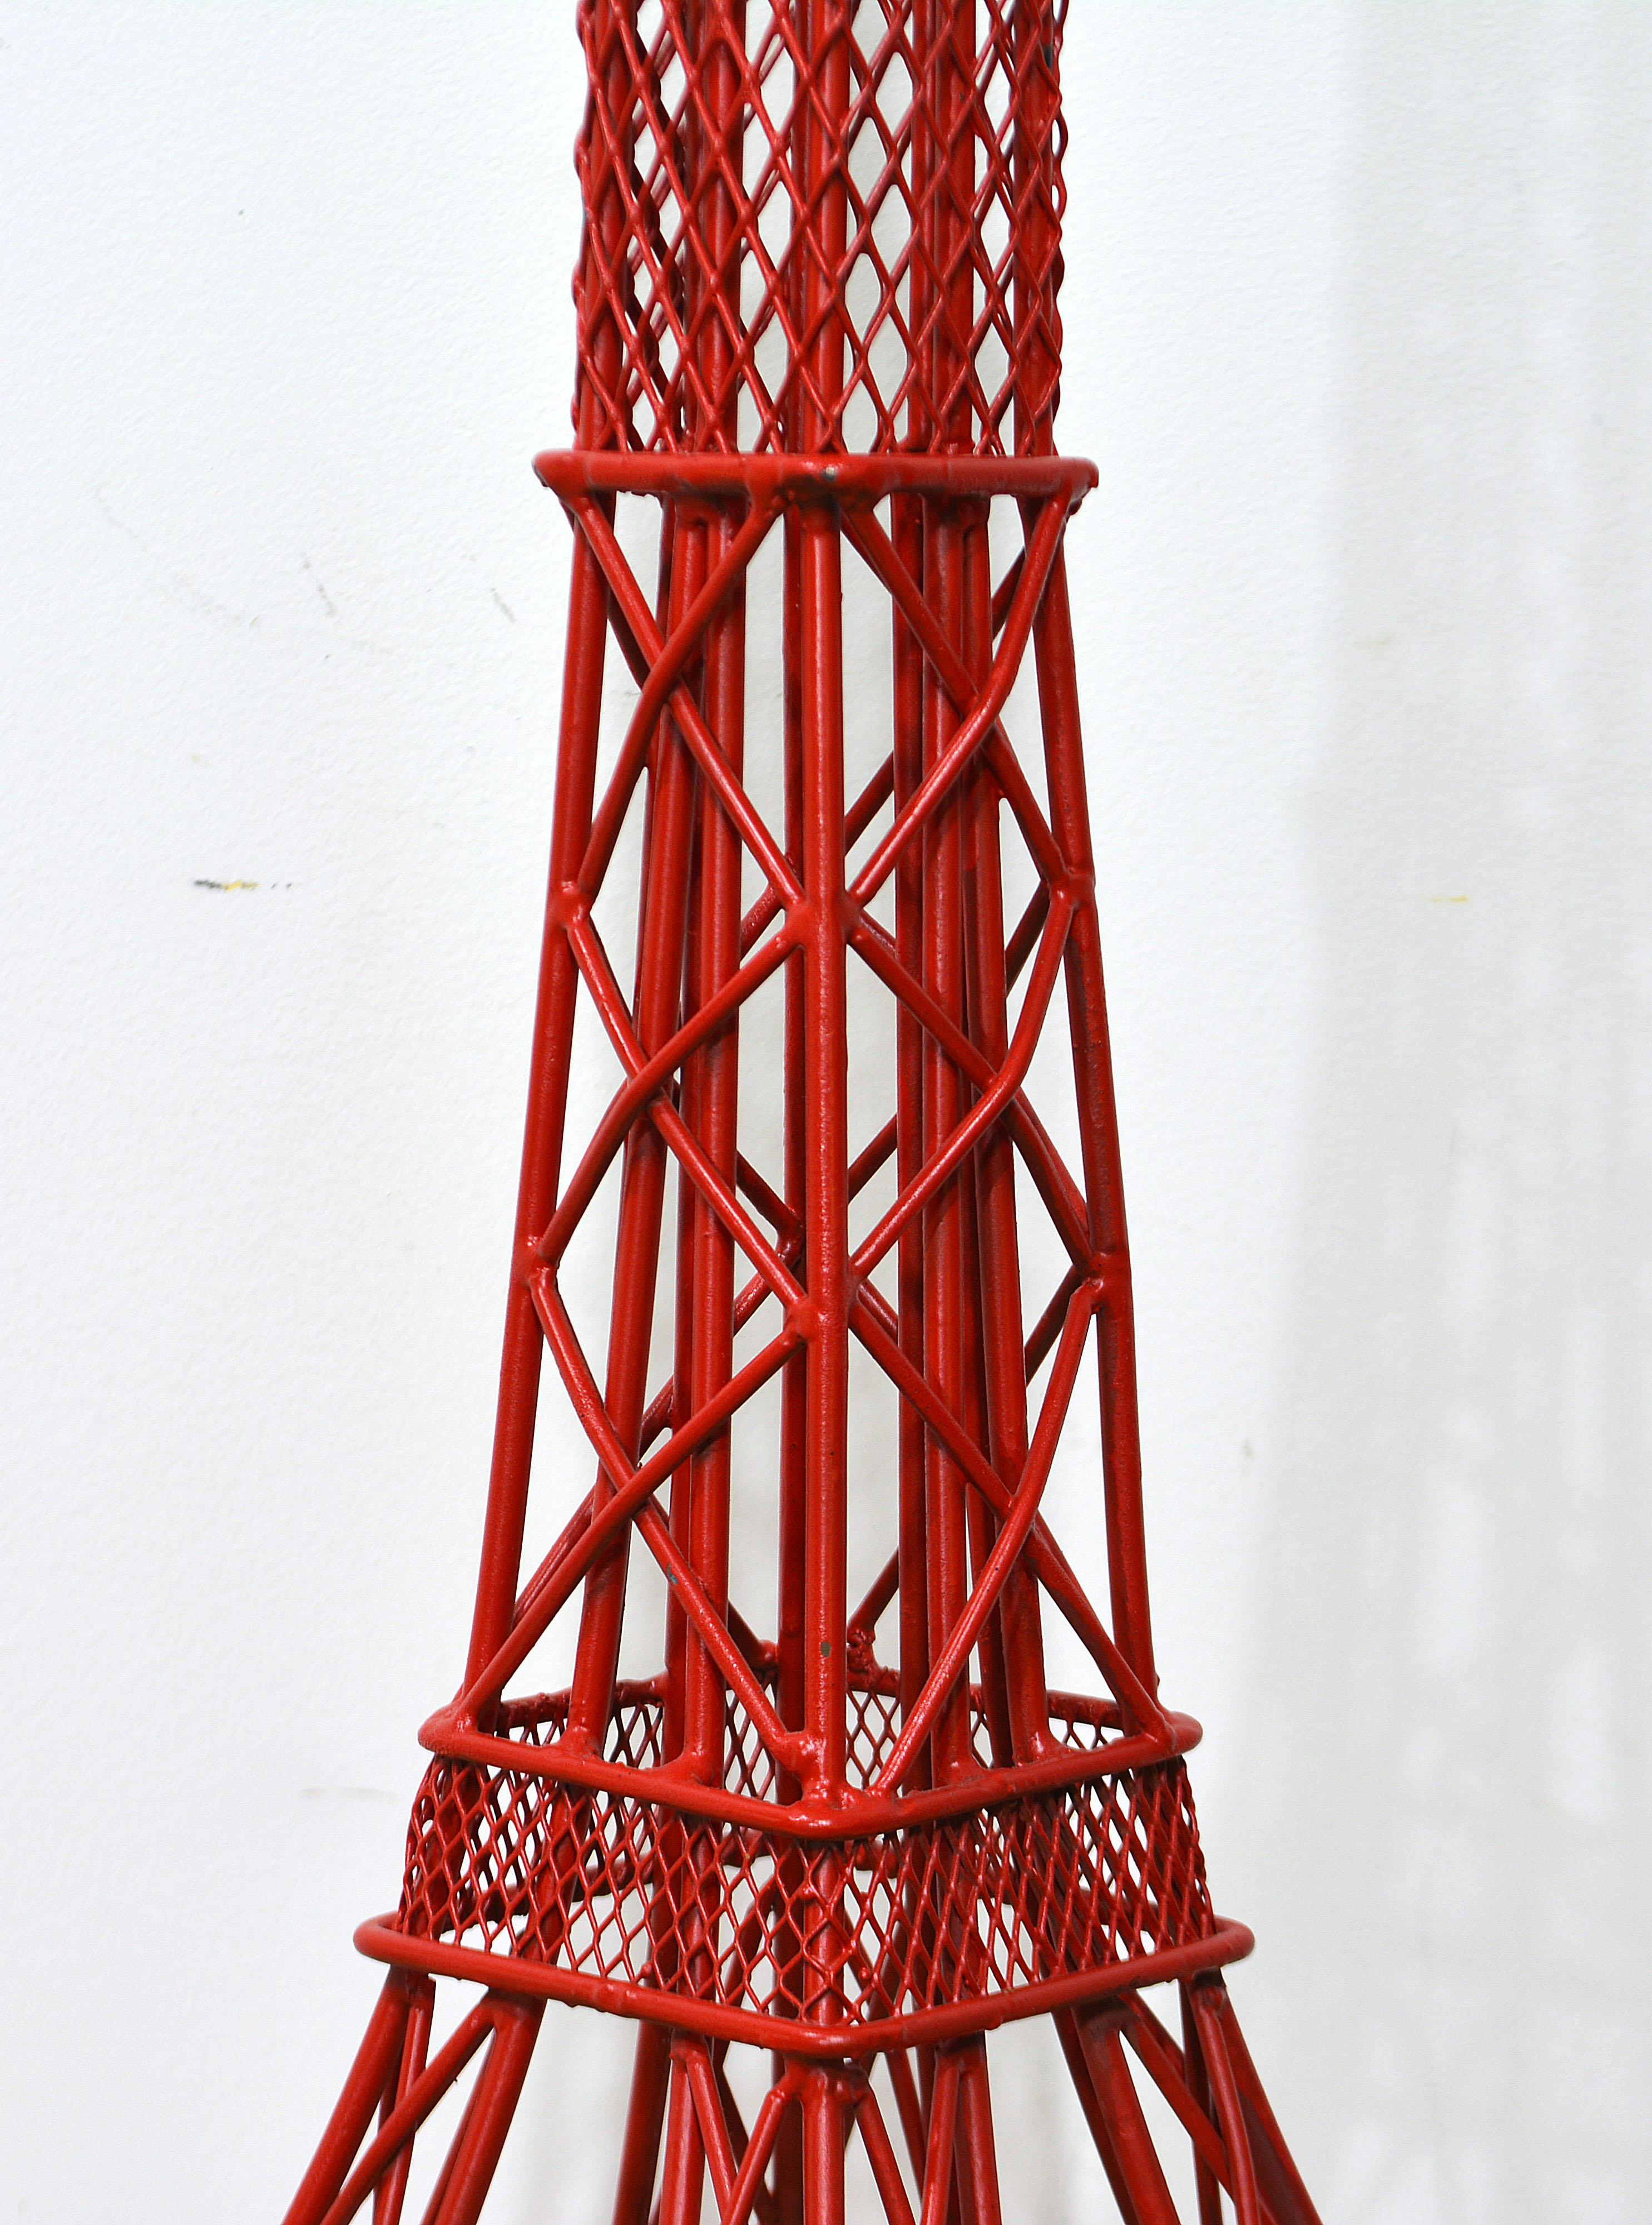 Tall Painted Decorative Steel Eifel Tower Inspired Lighthouse Sculpture or Model For Sale 3